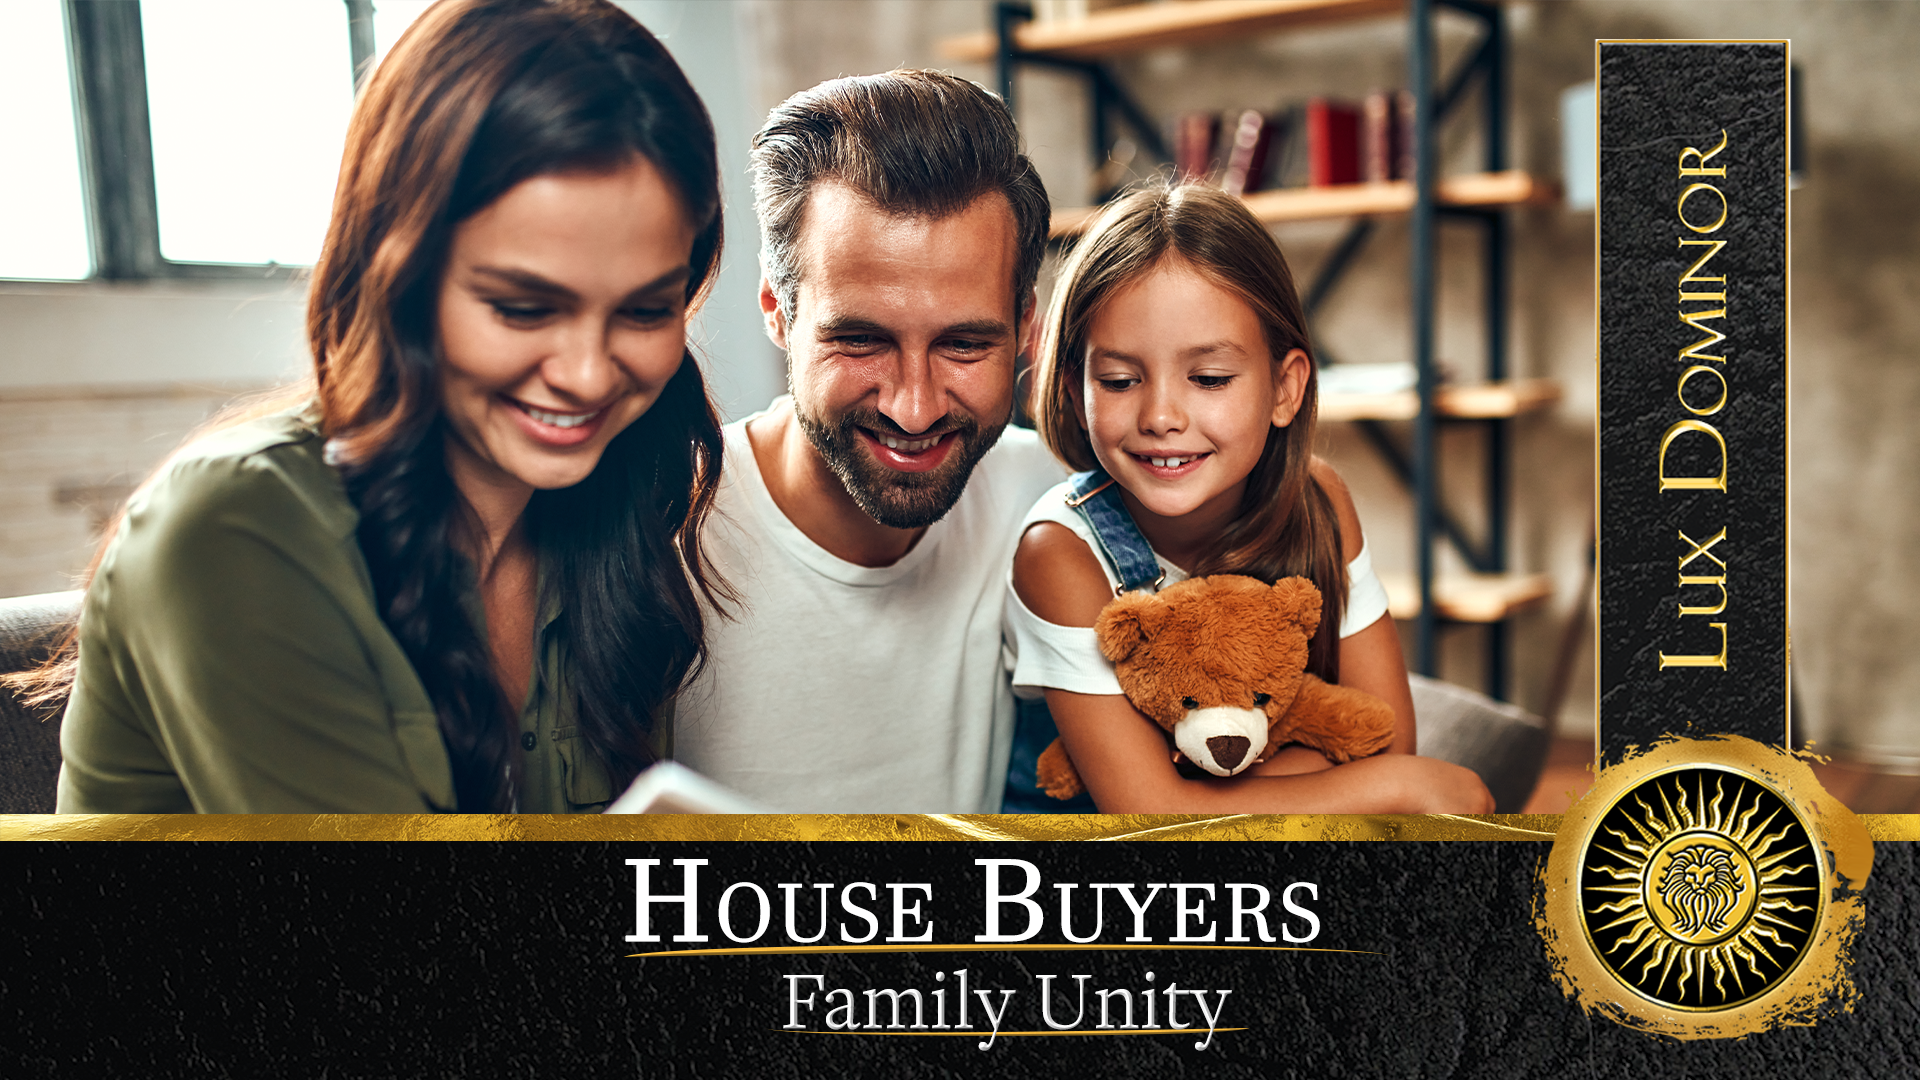 House Buyers For Family Unity - Cash Buyers In Houston Texas 1